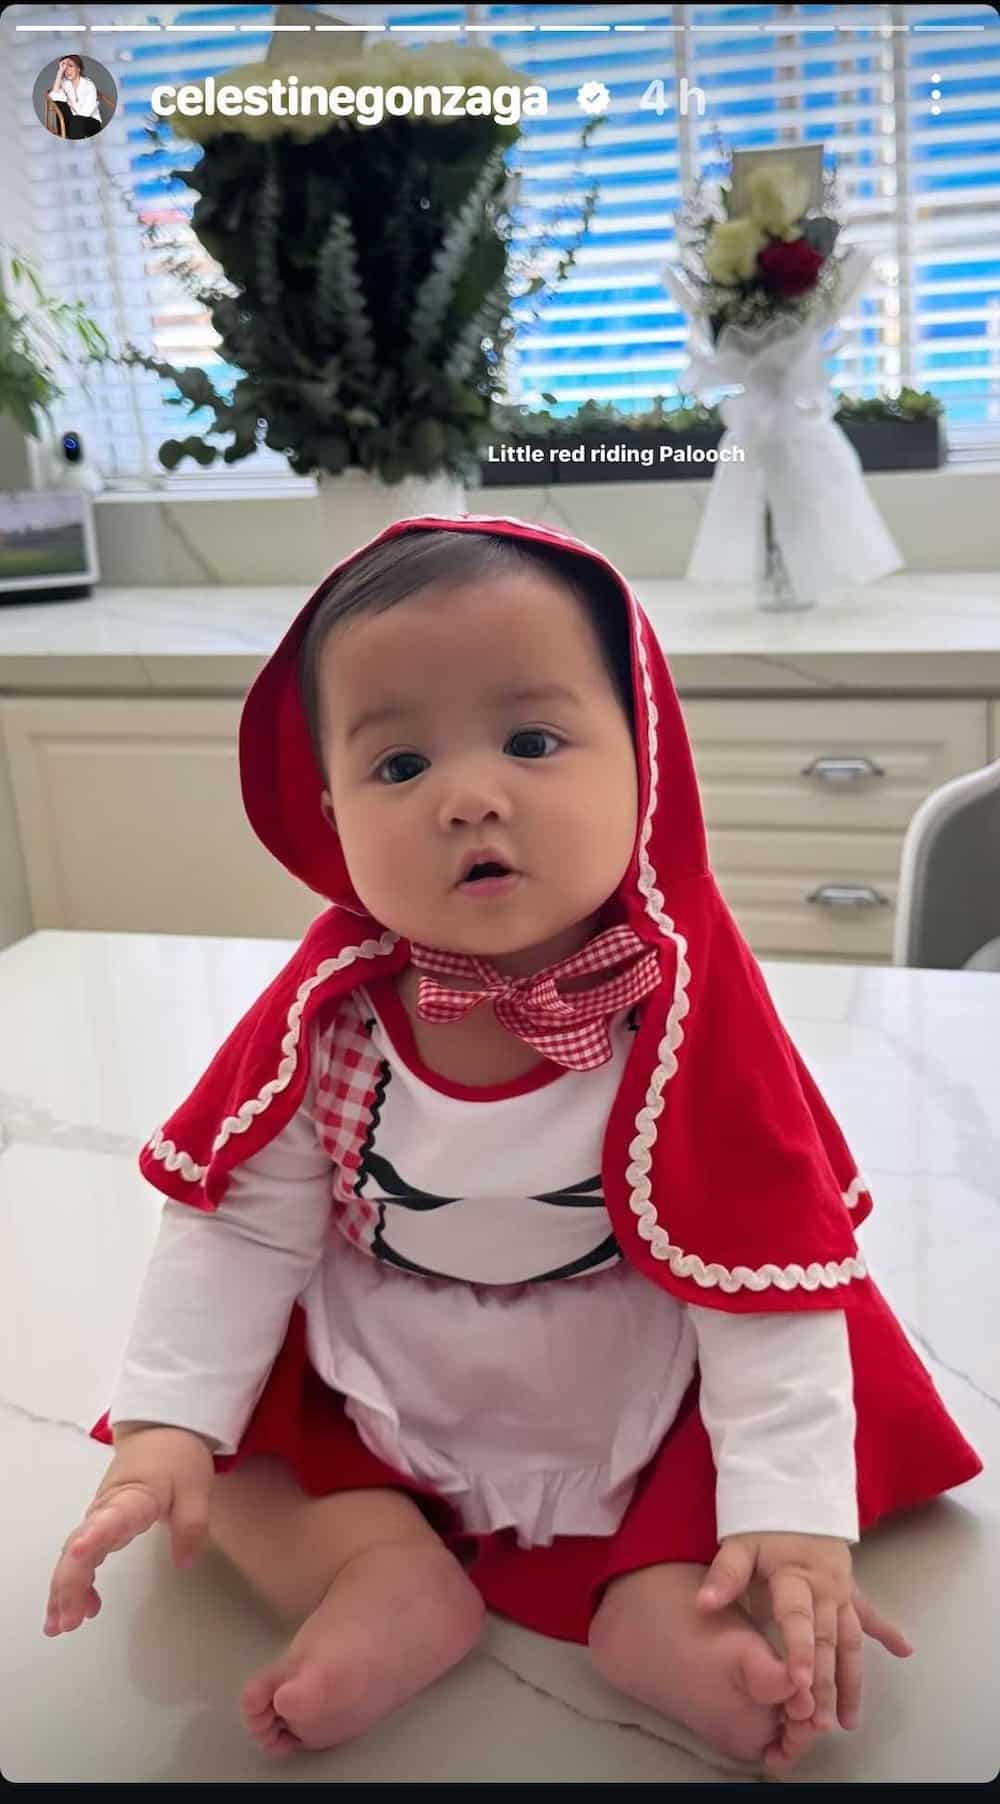 Toni Gonzaga shares cute snap of daughter Polly dressed as Little Red Riding Hood